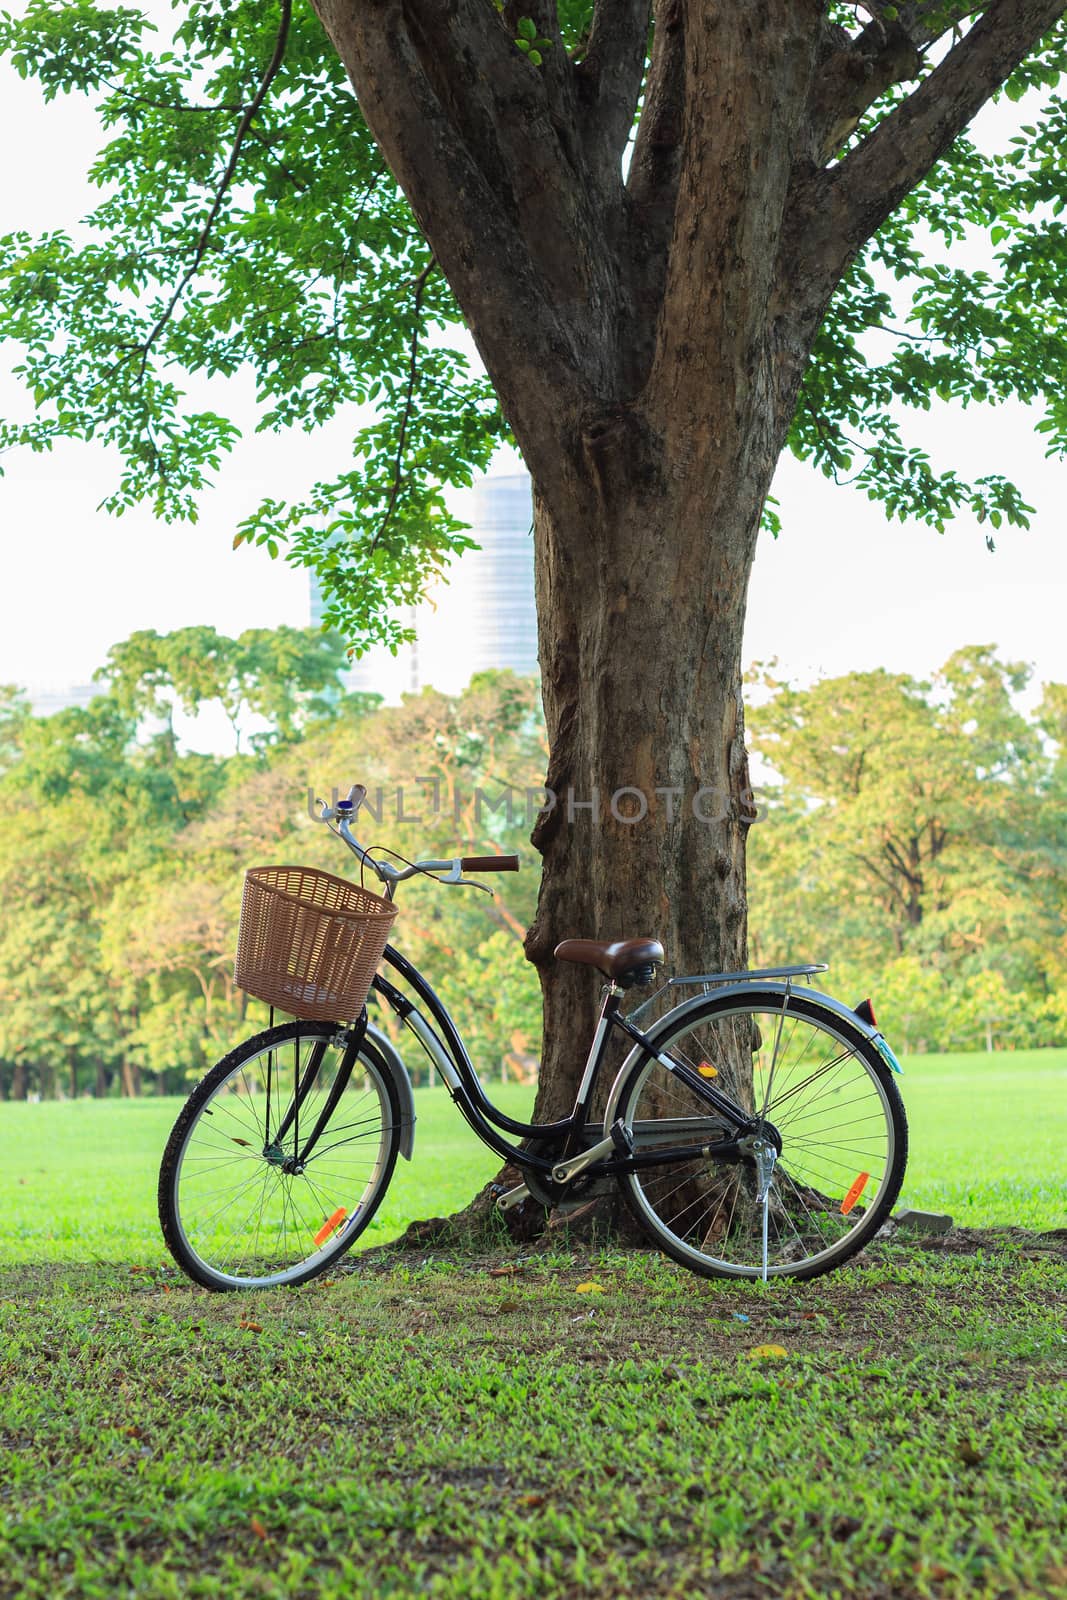 bicycle on green grass under tree by blackzheep